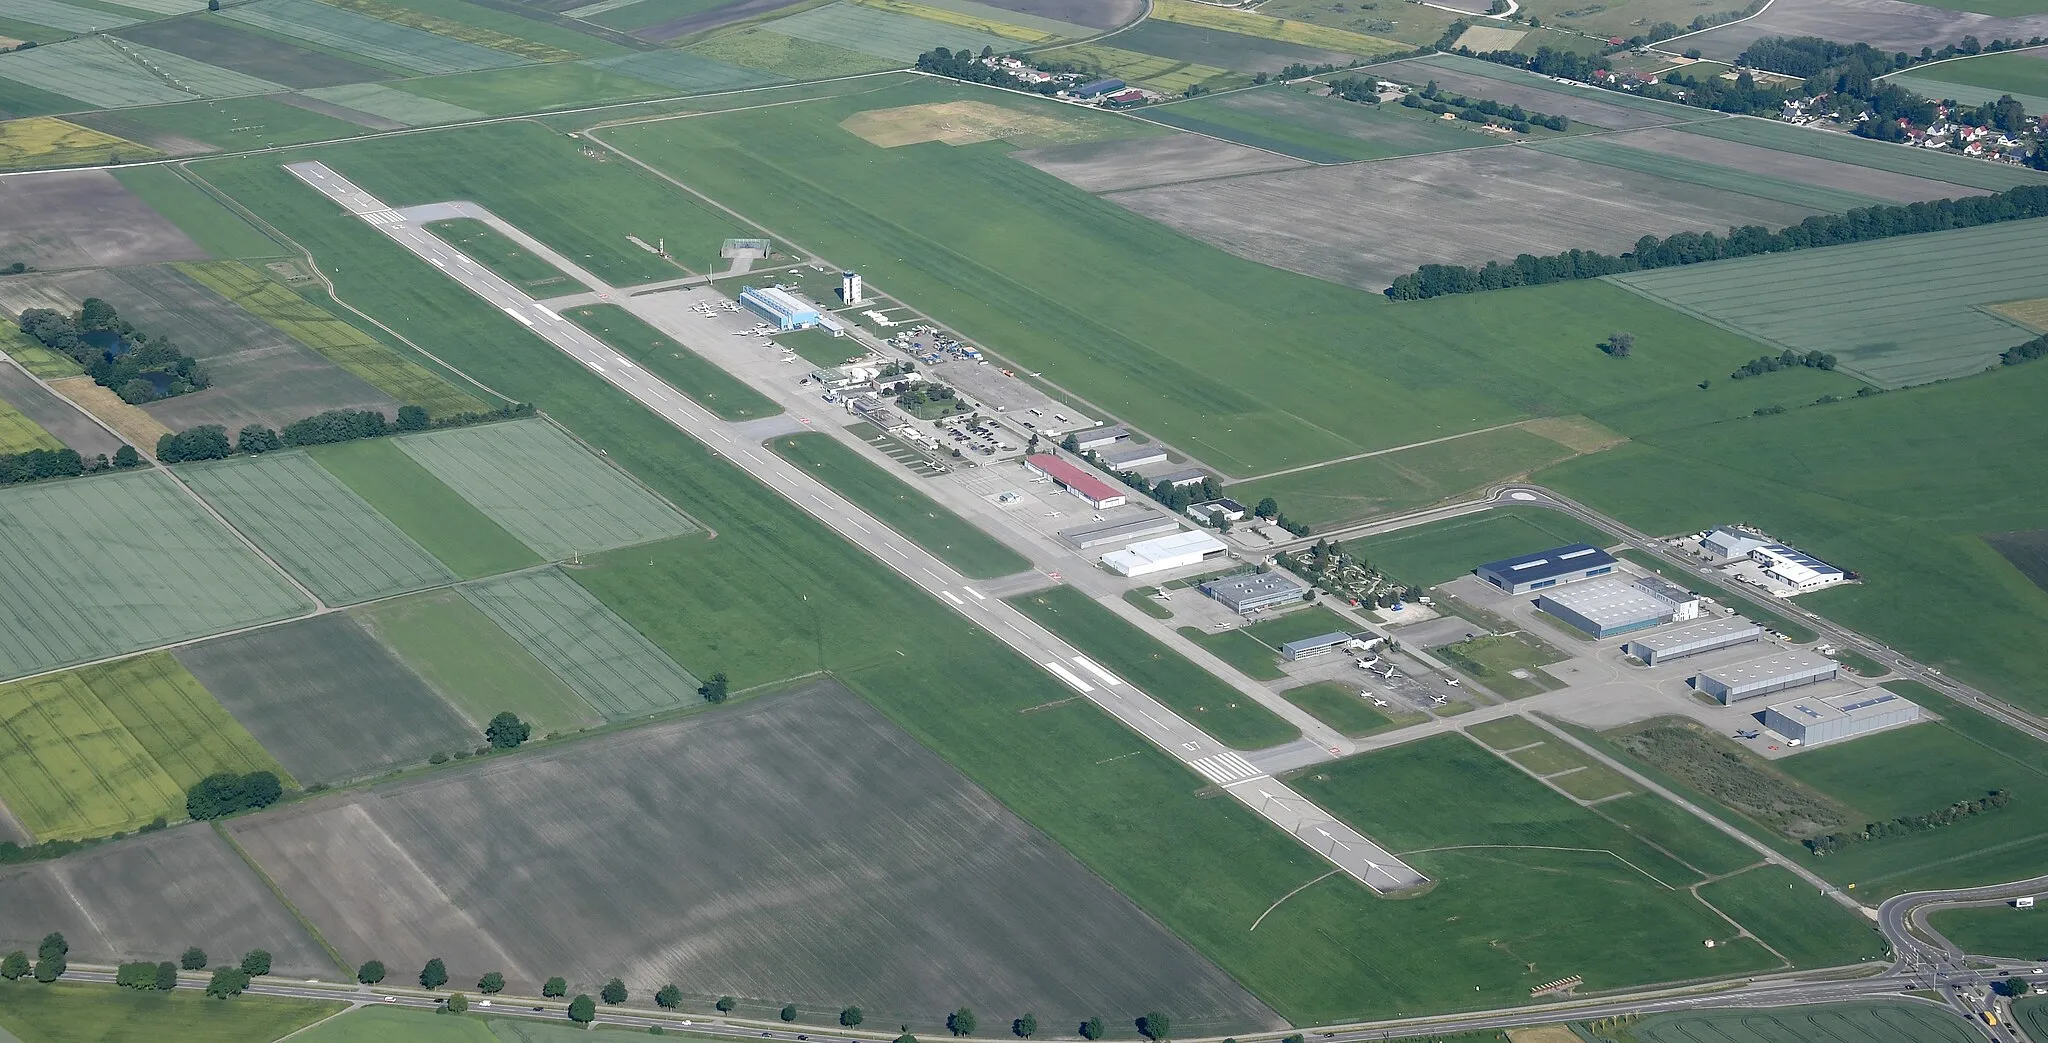 Photo showing: Aerial image of the Augsburg airport